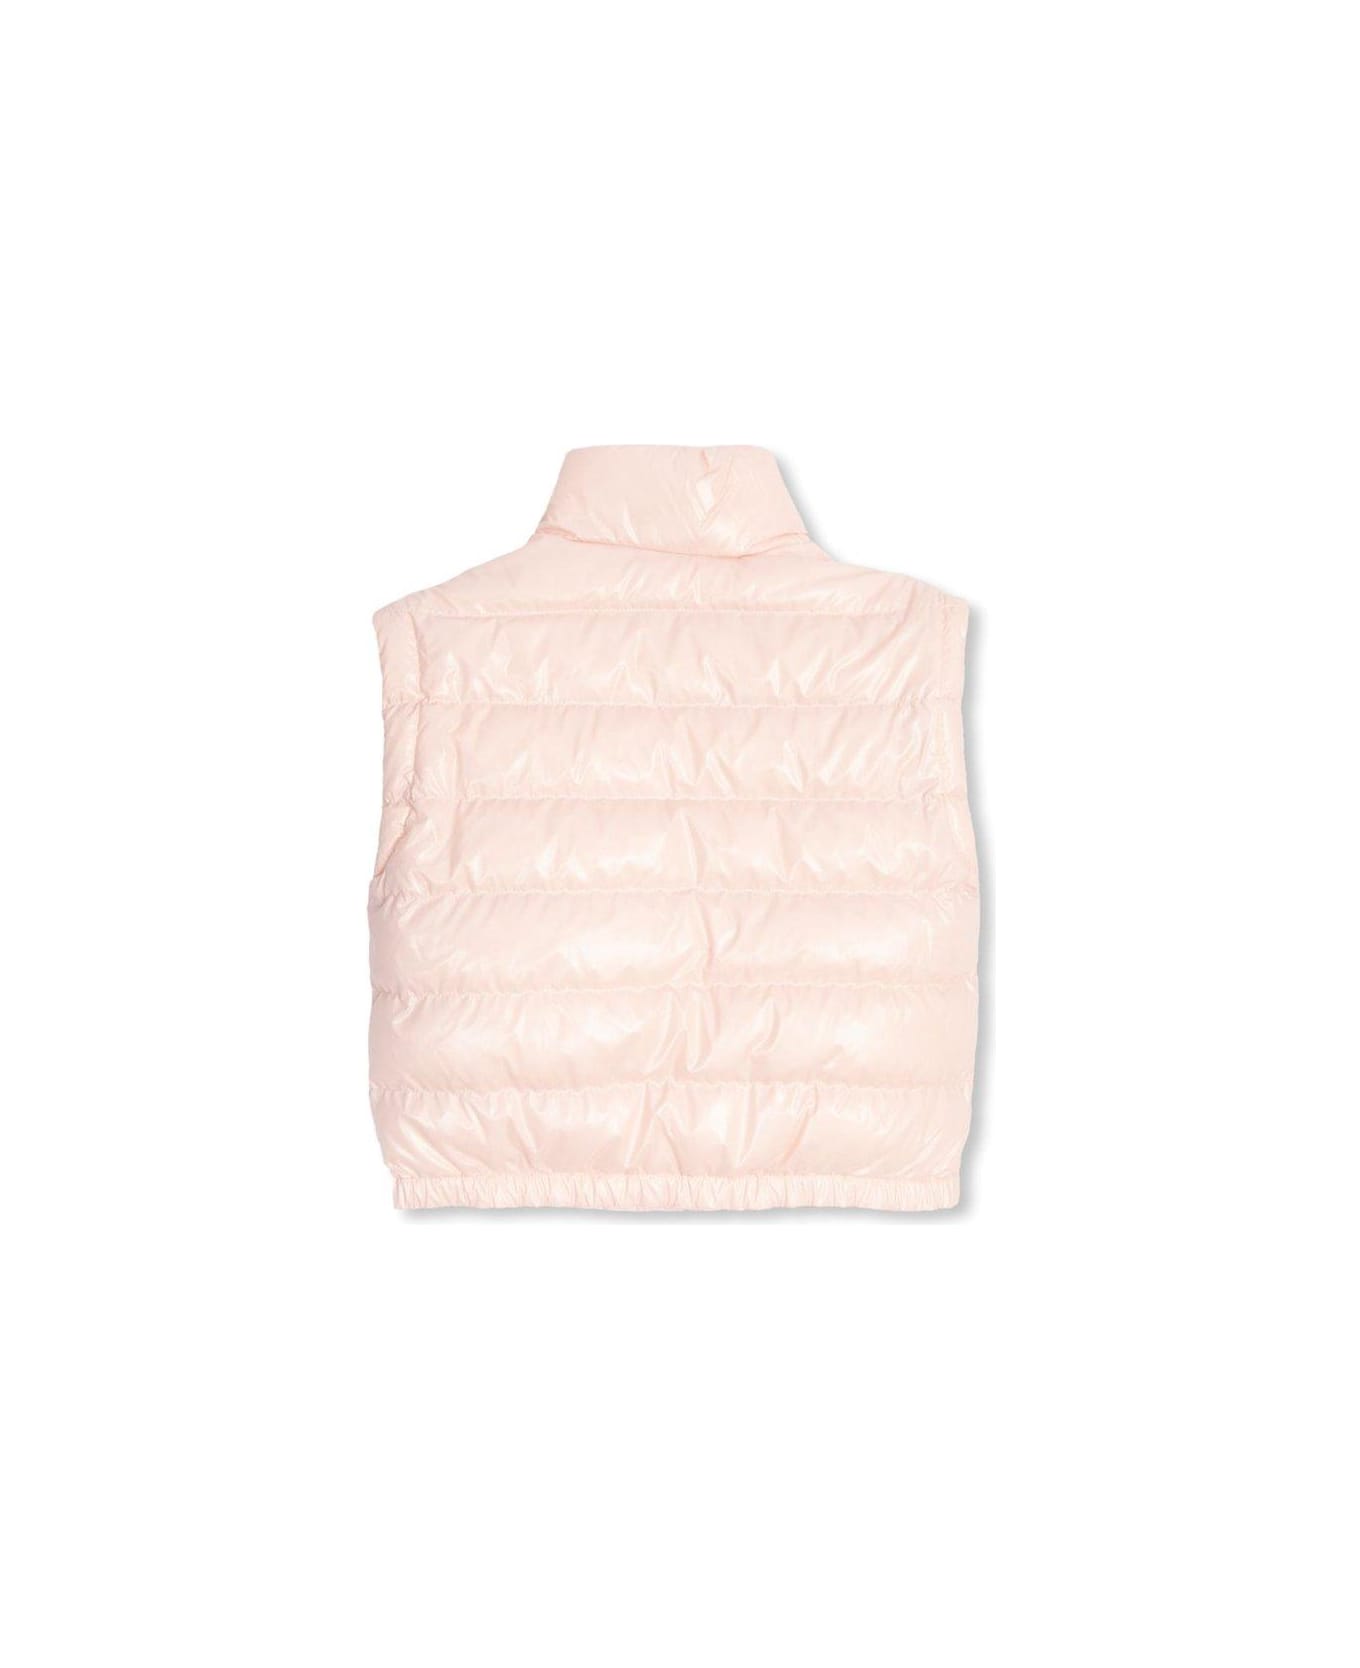 Moncler Detachable Sleeved Quilted Jacket - Pink